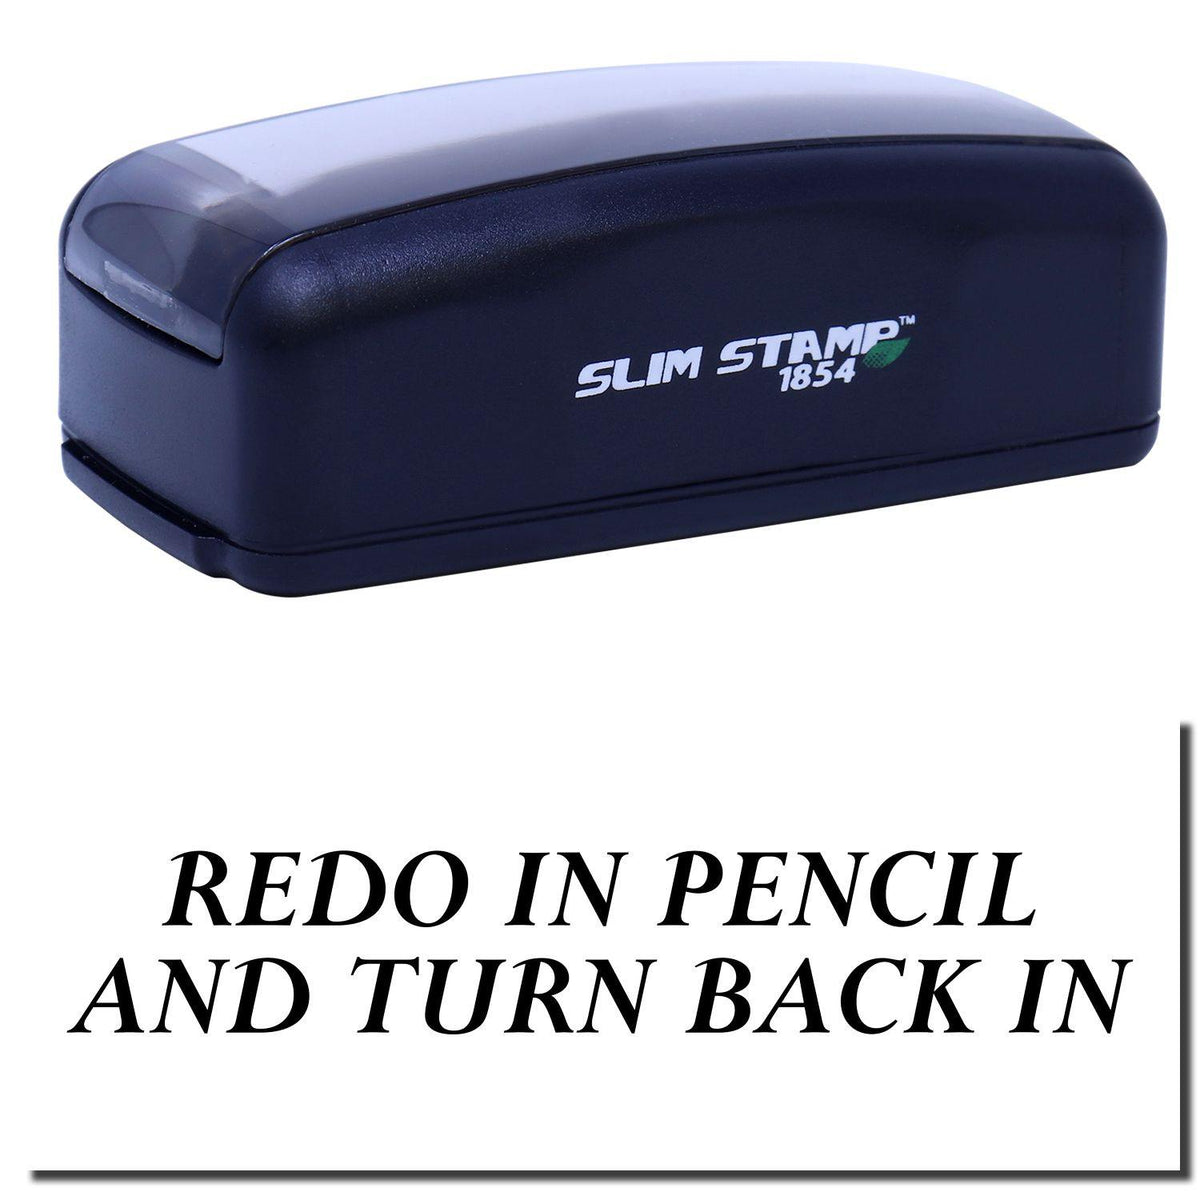 A stock office pre-inked stamp with a stamped image showing how the text &quot;REDO IN PENCIL AND TURN BACK IN&quot; in a large font is displayed after stamping.